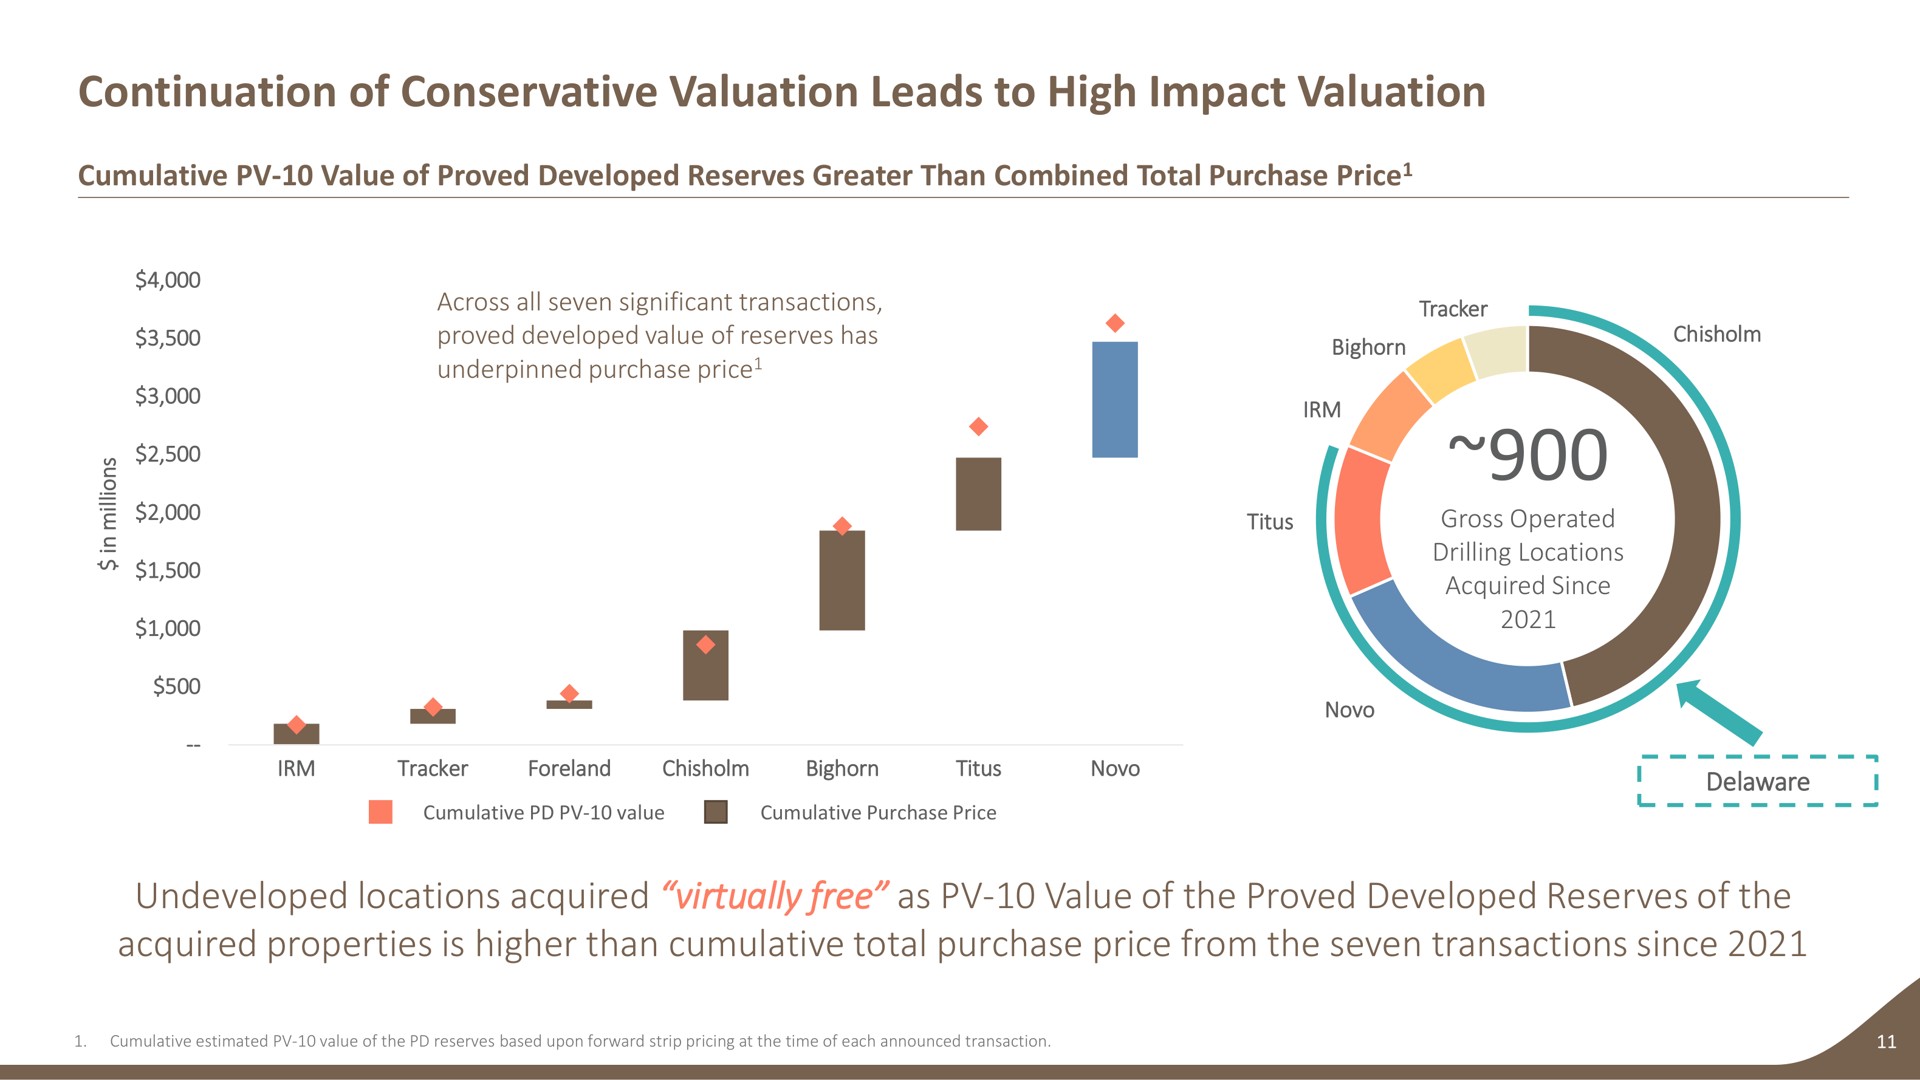 continuation of conservative valuation leads to high impact valuation cumulative value of proved developed reserves greater than combined total purchase price across all seven significant transactions proved developed value of reserves has underpinned purchase price gross operated drilling locations acquired since undeveloped locations acquired virtually free as value of the proved developed reserves of the acquired properties is higher than cumulative total purchase price from the seven transactions since a tracker bighorn a nits tracker foreland bighorn i | Earthstone Energy